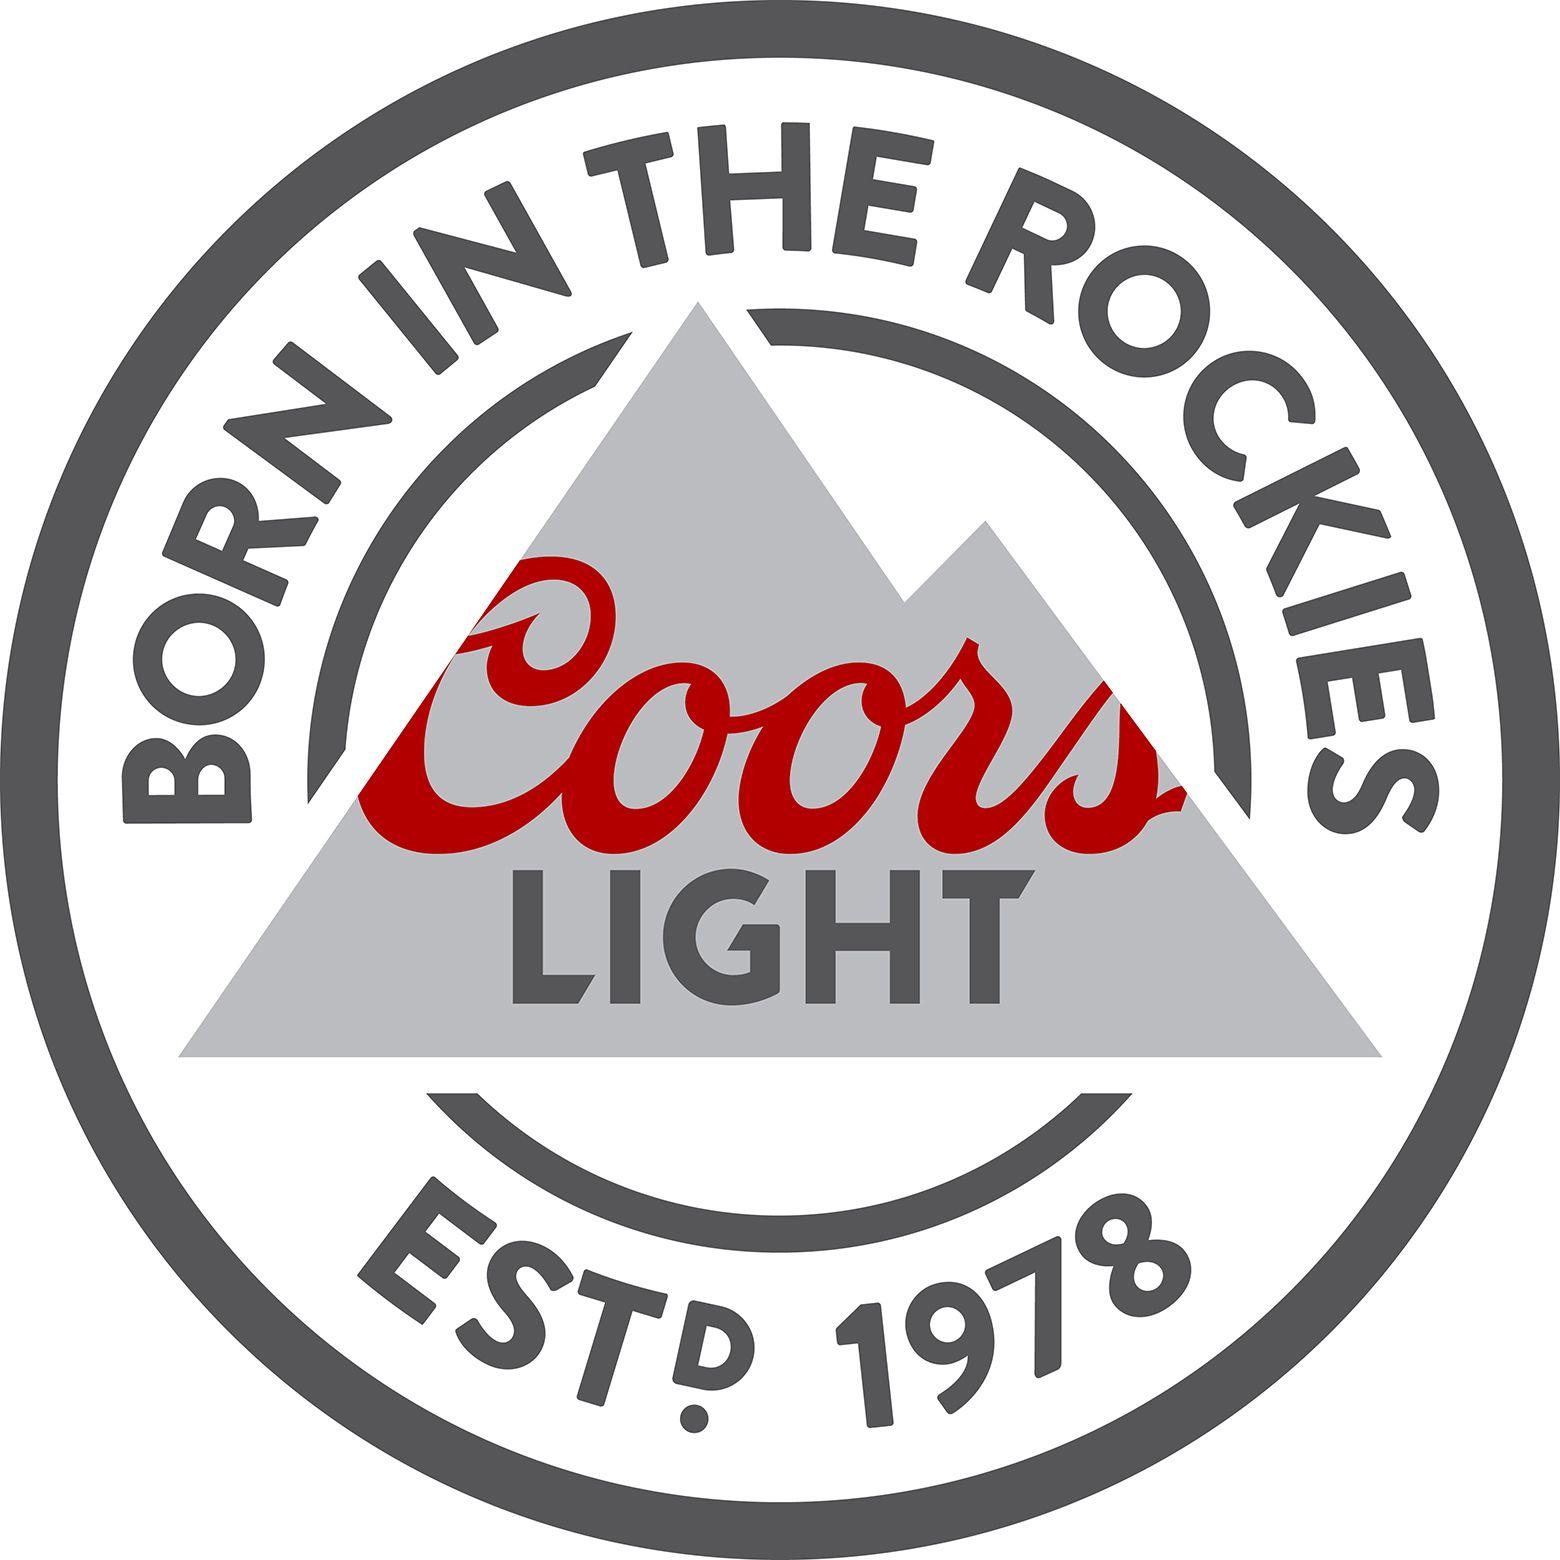 Coors Light Football Logo - Coors Light/96.5 The Mill Big Game Pregame Party at | 96.5 THE MILL